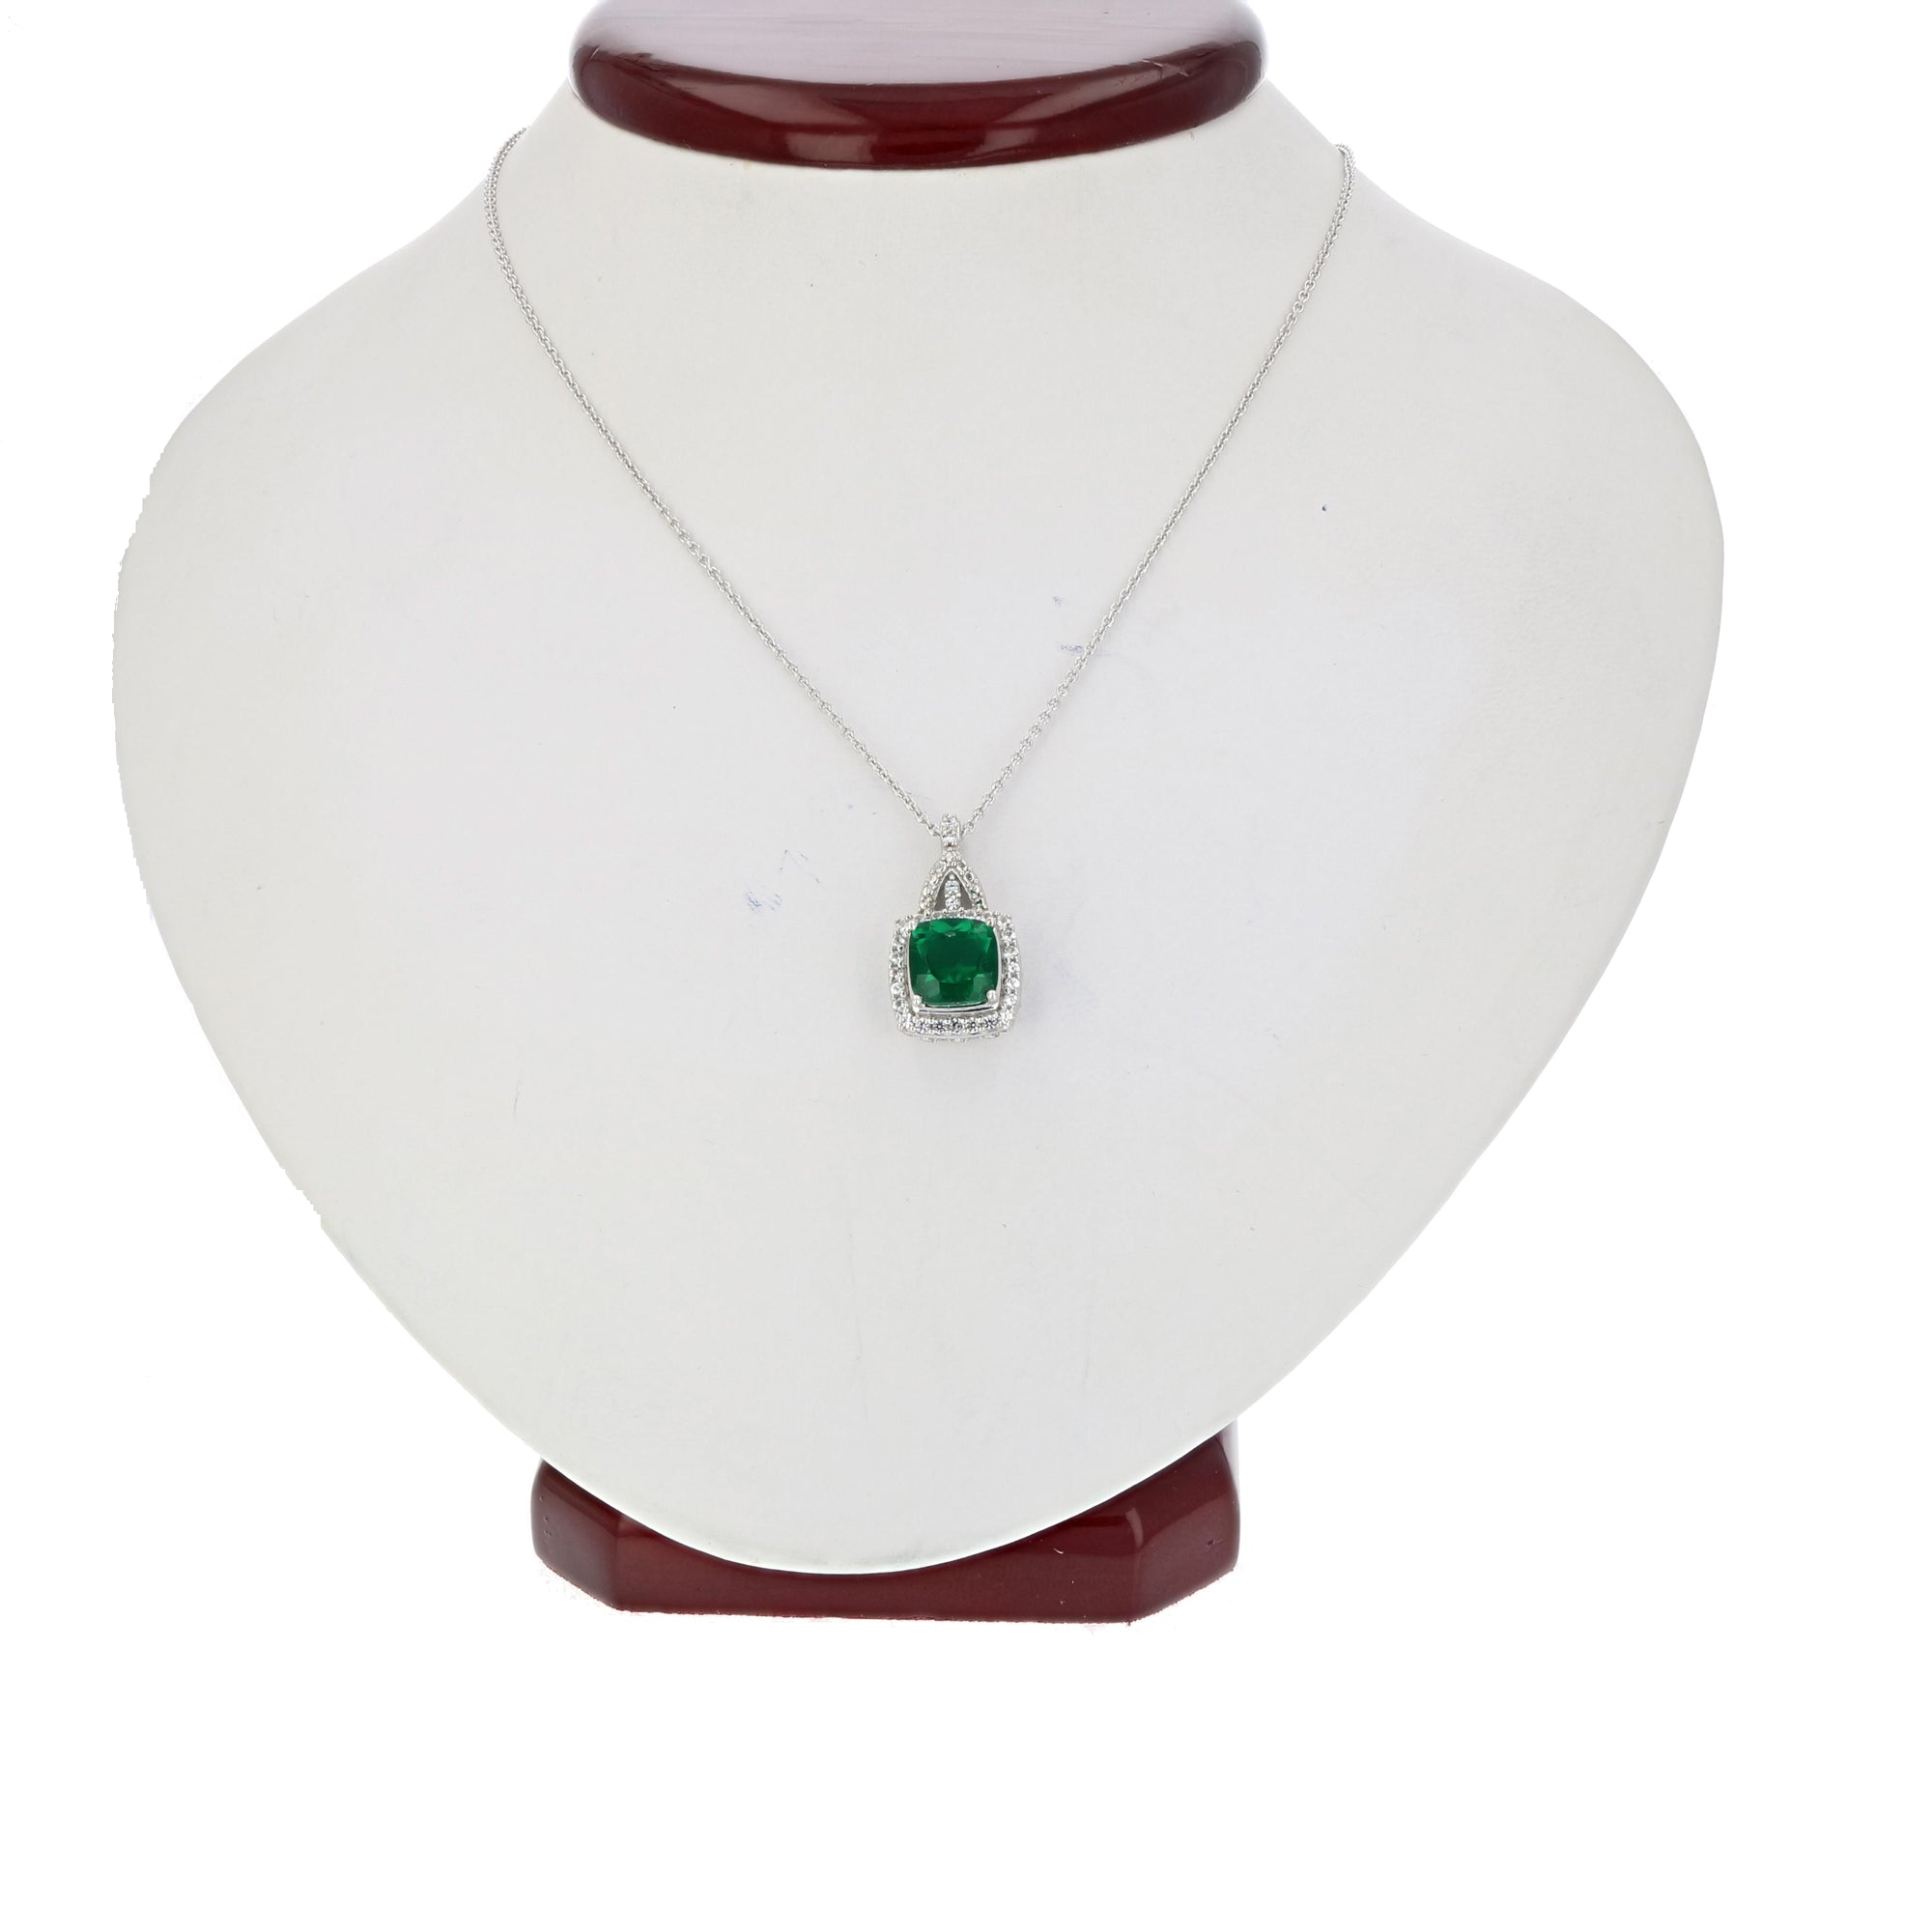 1.50 cttw Cushion Cut Created Emerald Pendant .925 Sterling Silver with Chain